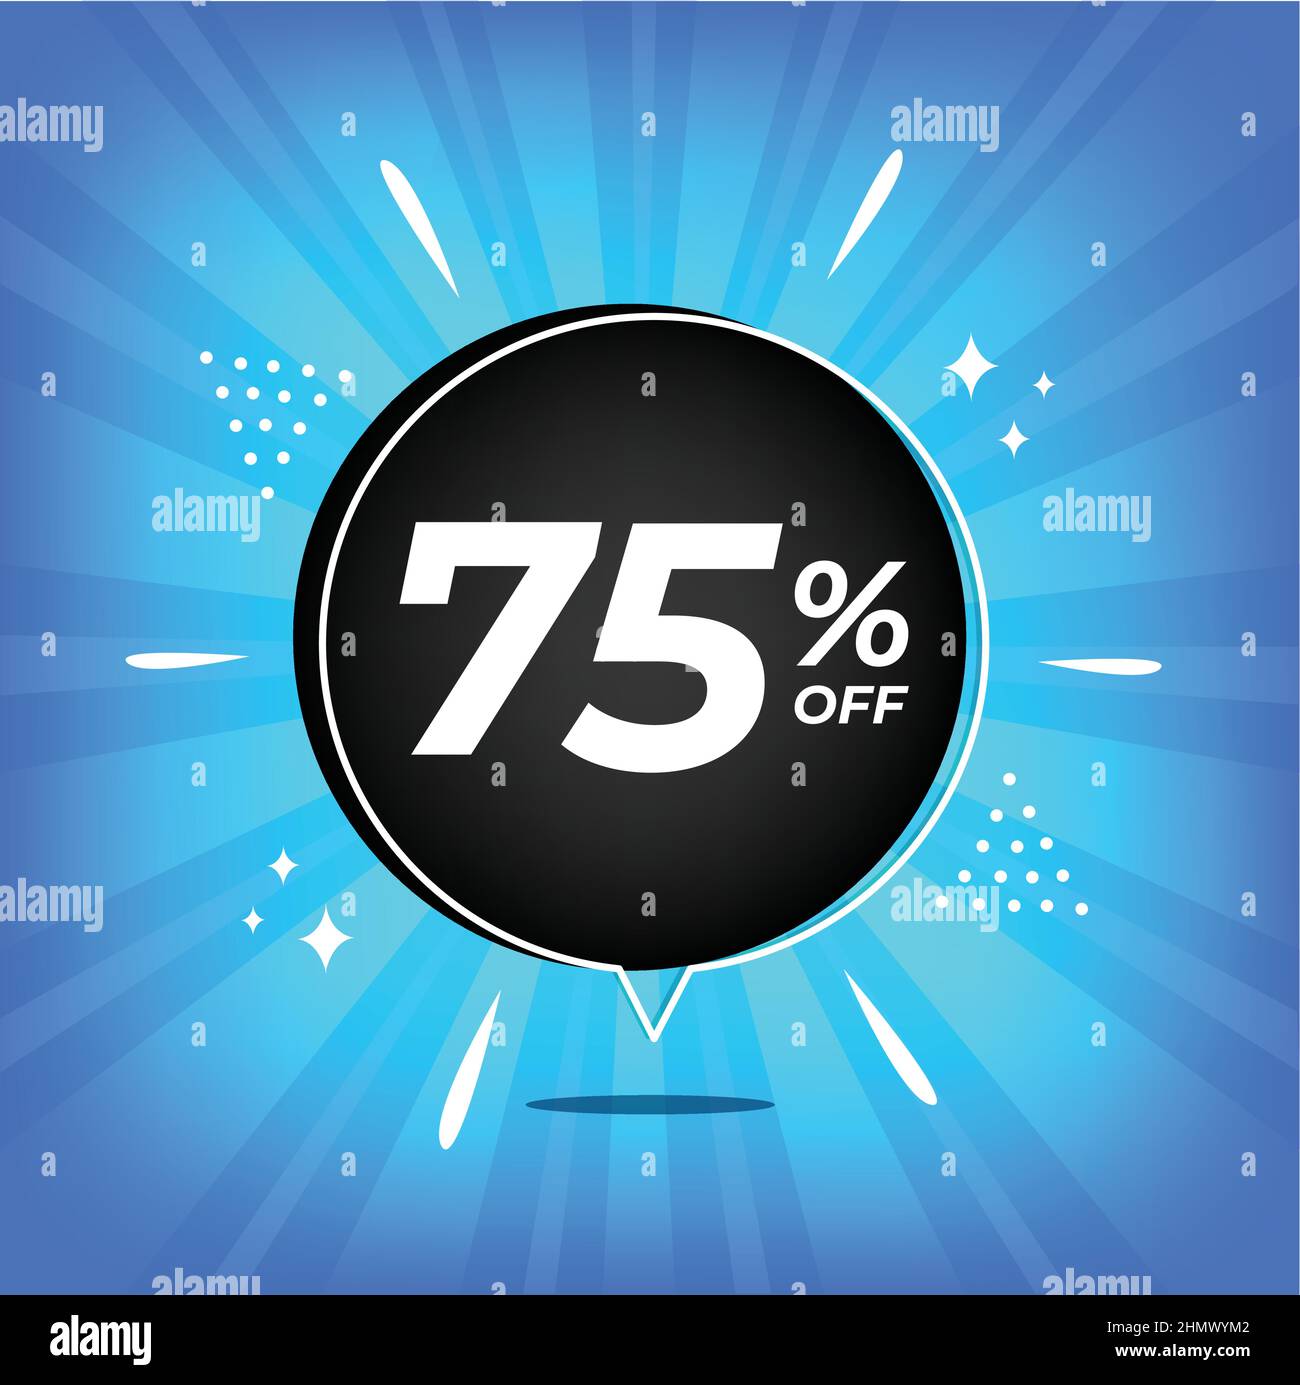 75% off. Blue banner with seventy-five percent discount on a black balloon for mega big sales. Stock Vector